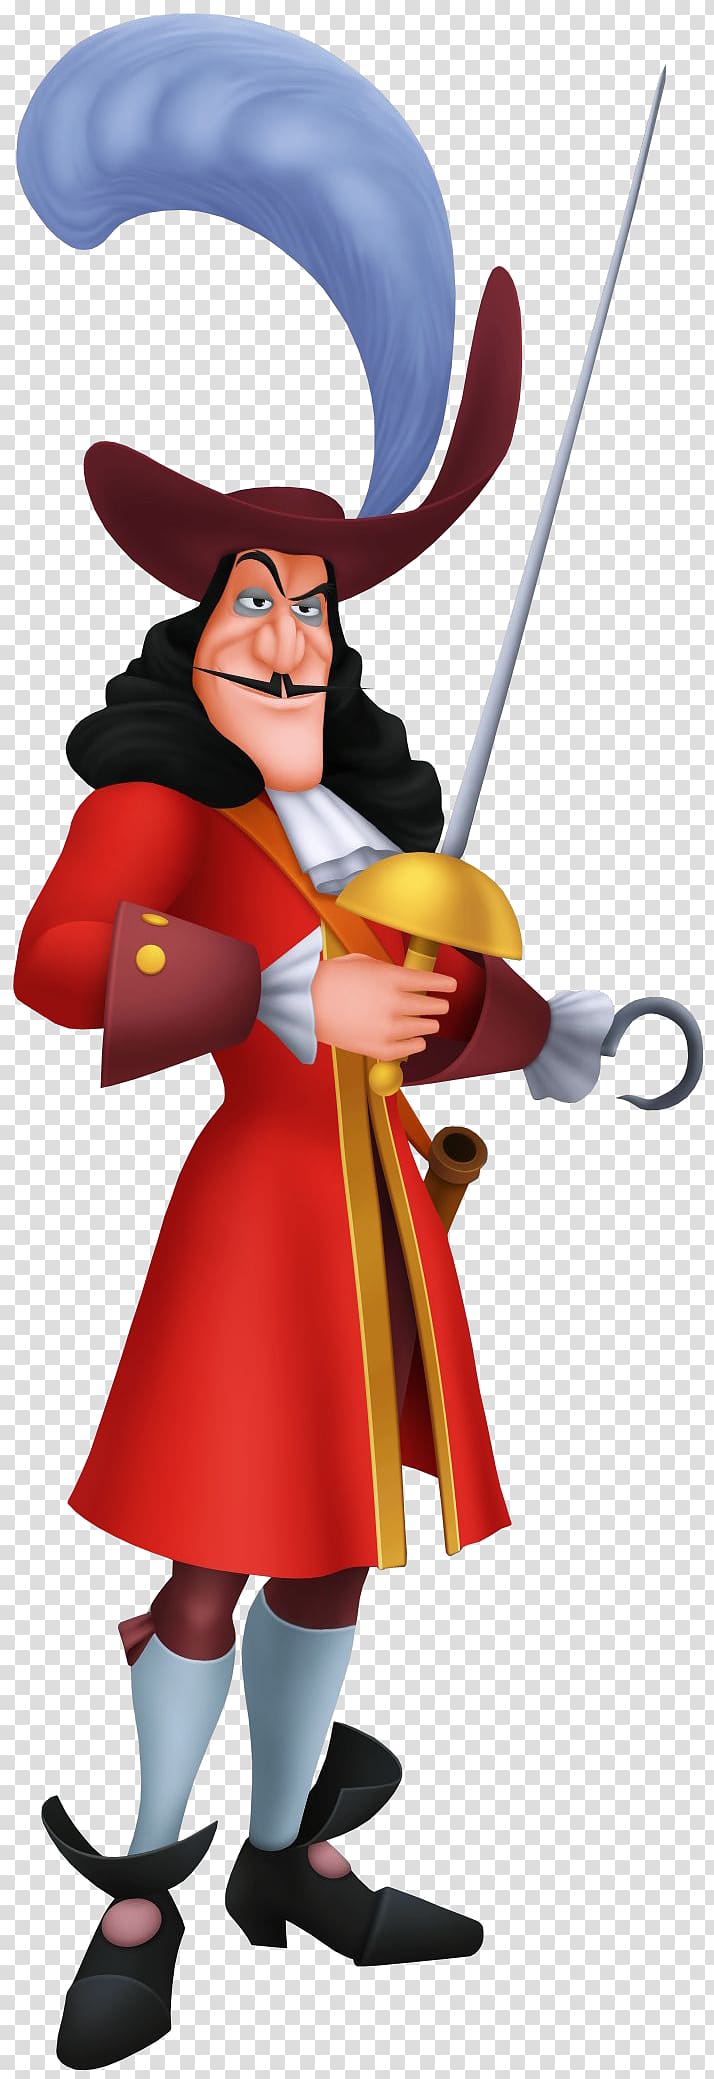 Disney pirate character illustration, Kingdom Hearts Birth by Sleep Kingdom Hearts: Chain of Memories Kingdom Hearts HD 1.5 Remix Kingdom Hearts 358/2 Days Captain Hook, peter pan transparent background PNG clipart